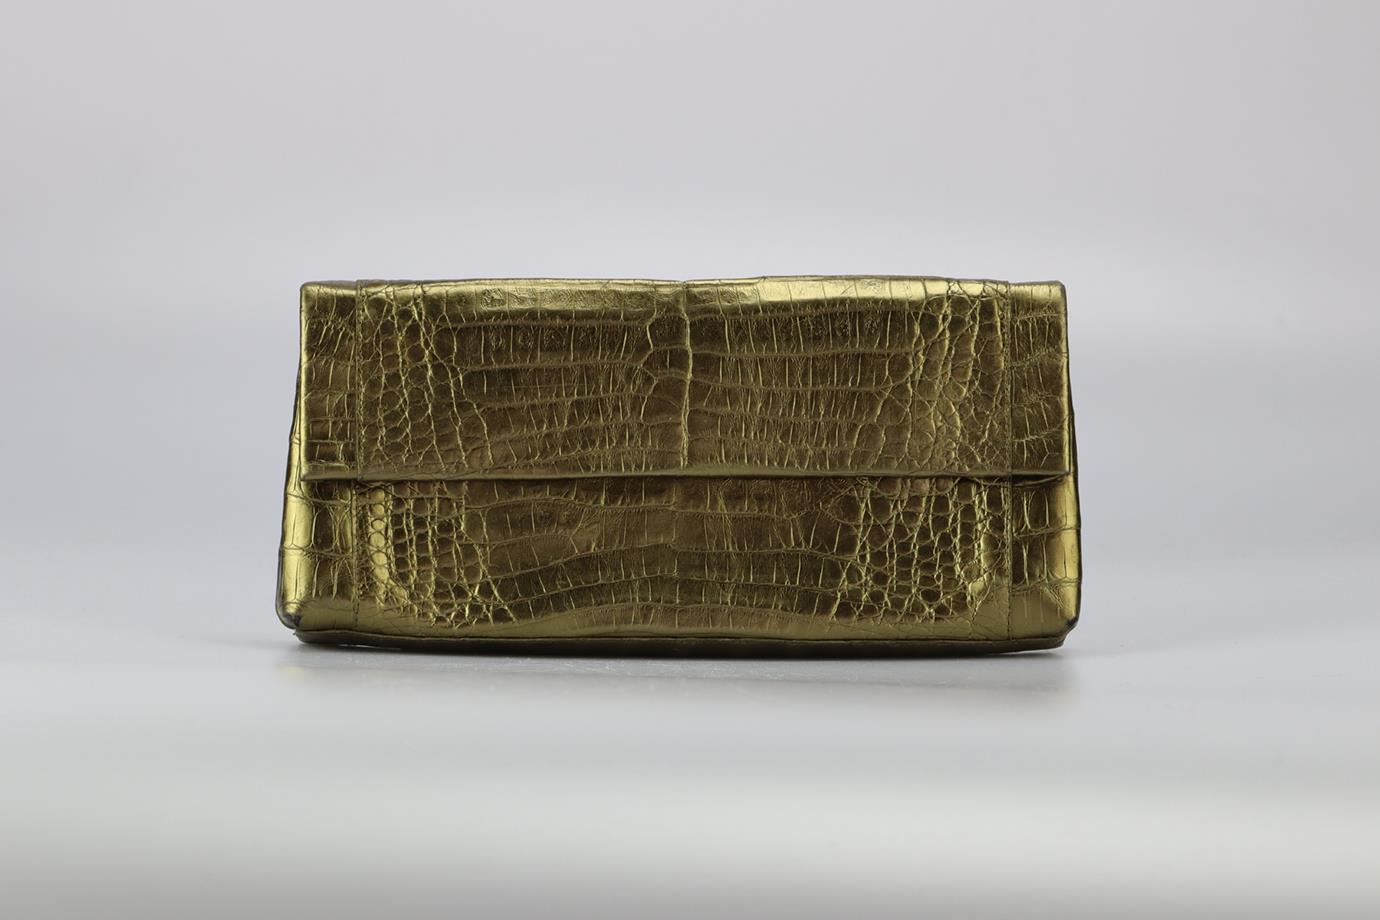 Nancy Gonzalez Metallic Crocodile Clutch. Gold. Magnetic fastening - Front. Does not come with - dustbag or box. Height: 5.2 in. Width: 11.1 in. Depth: 1.5 in. Condition: Used. Very good condition - No signs of wear; see pictures.